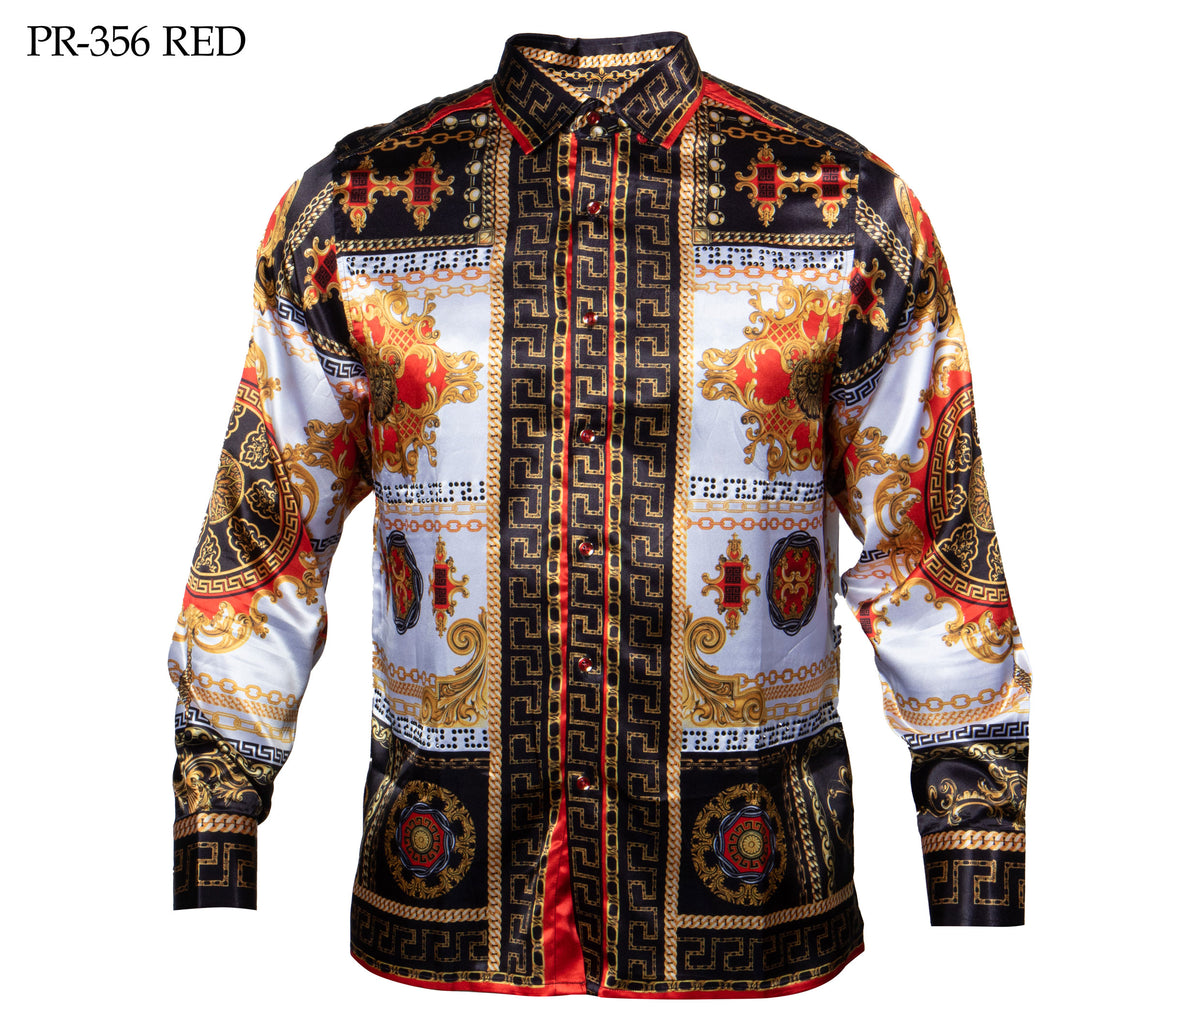 Prestige Red Gold Crystal Monarch Button Up Shirt - Dudes Boutique